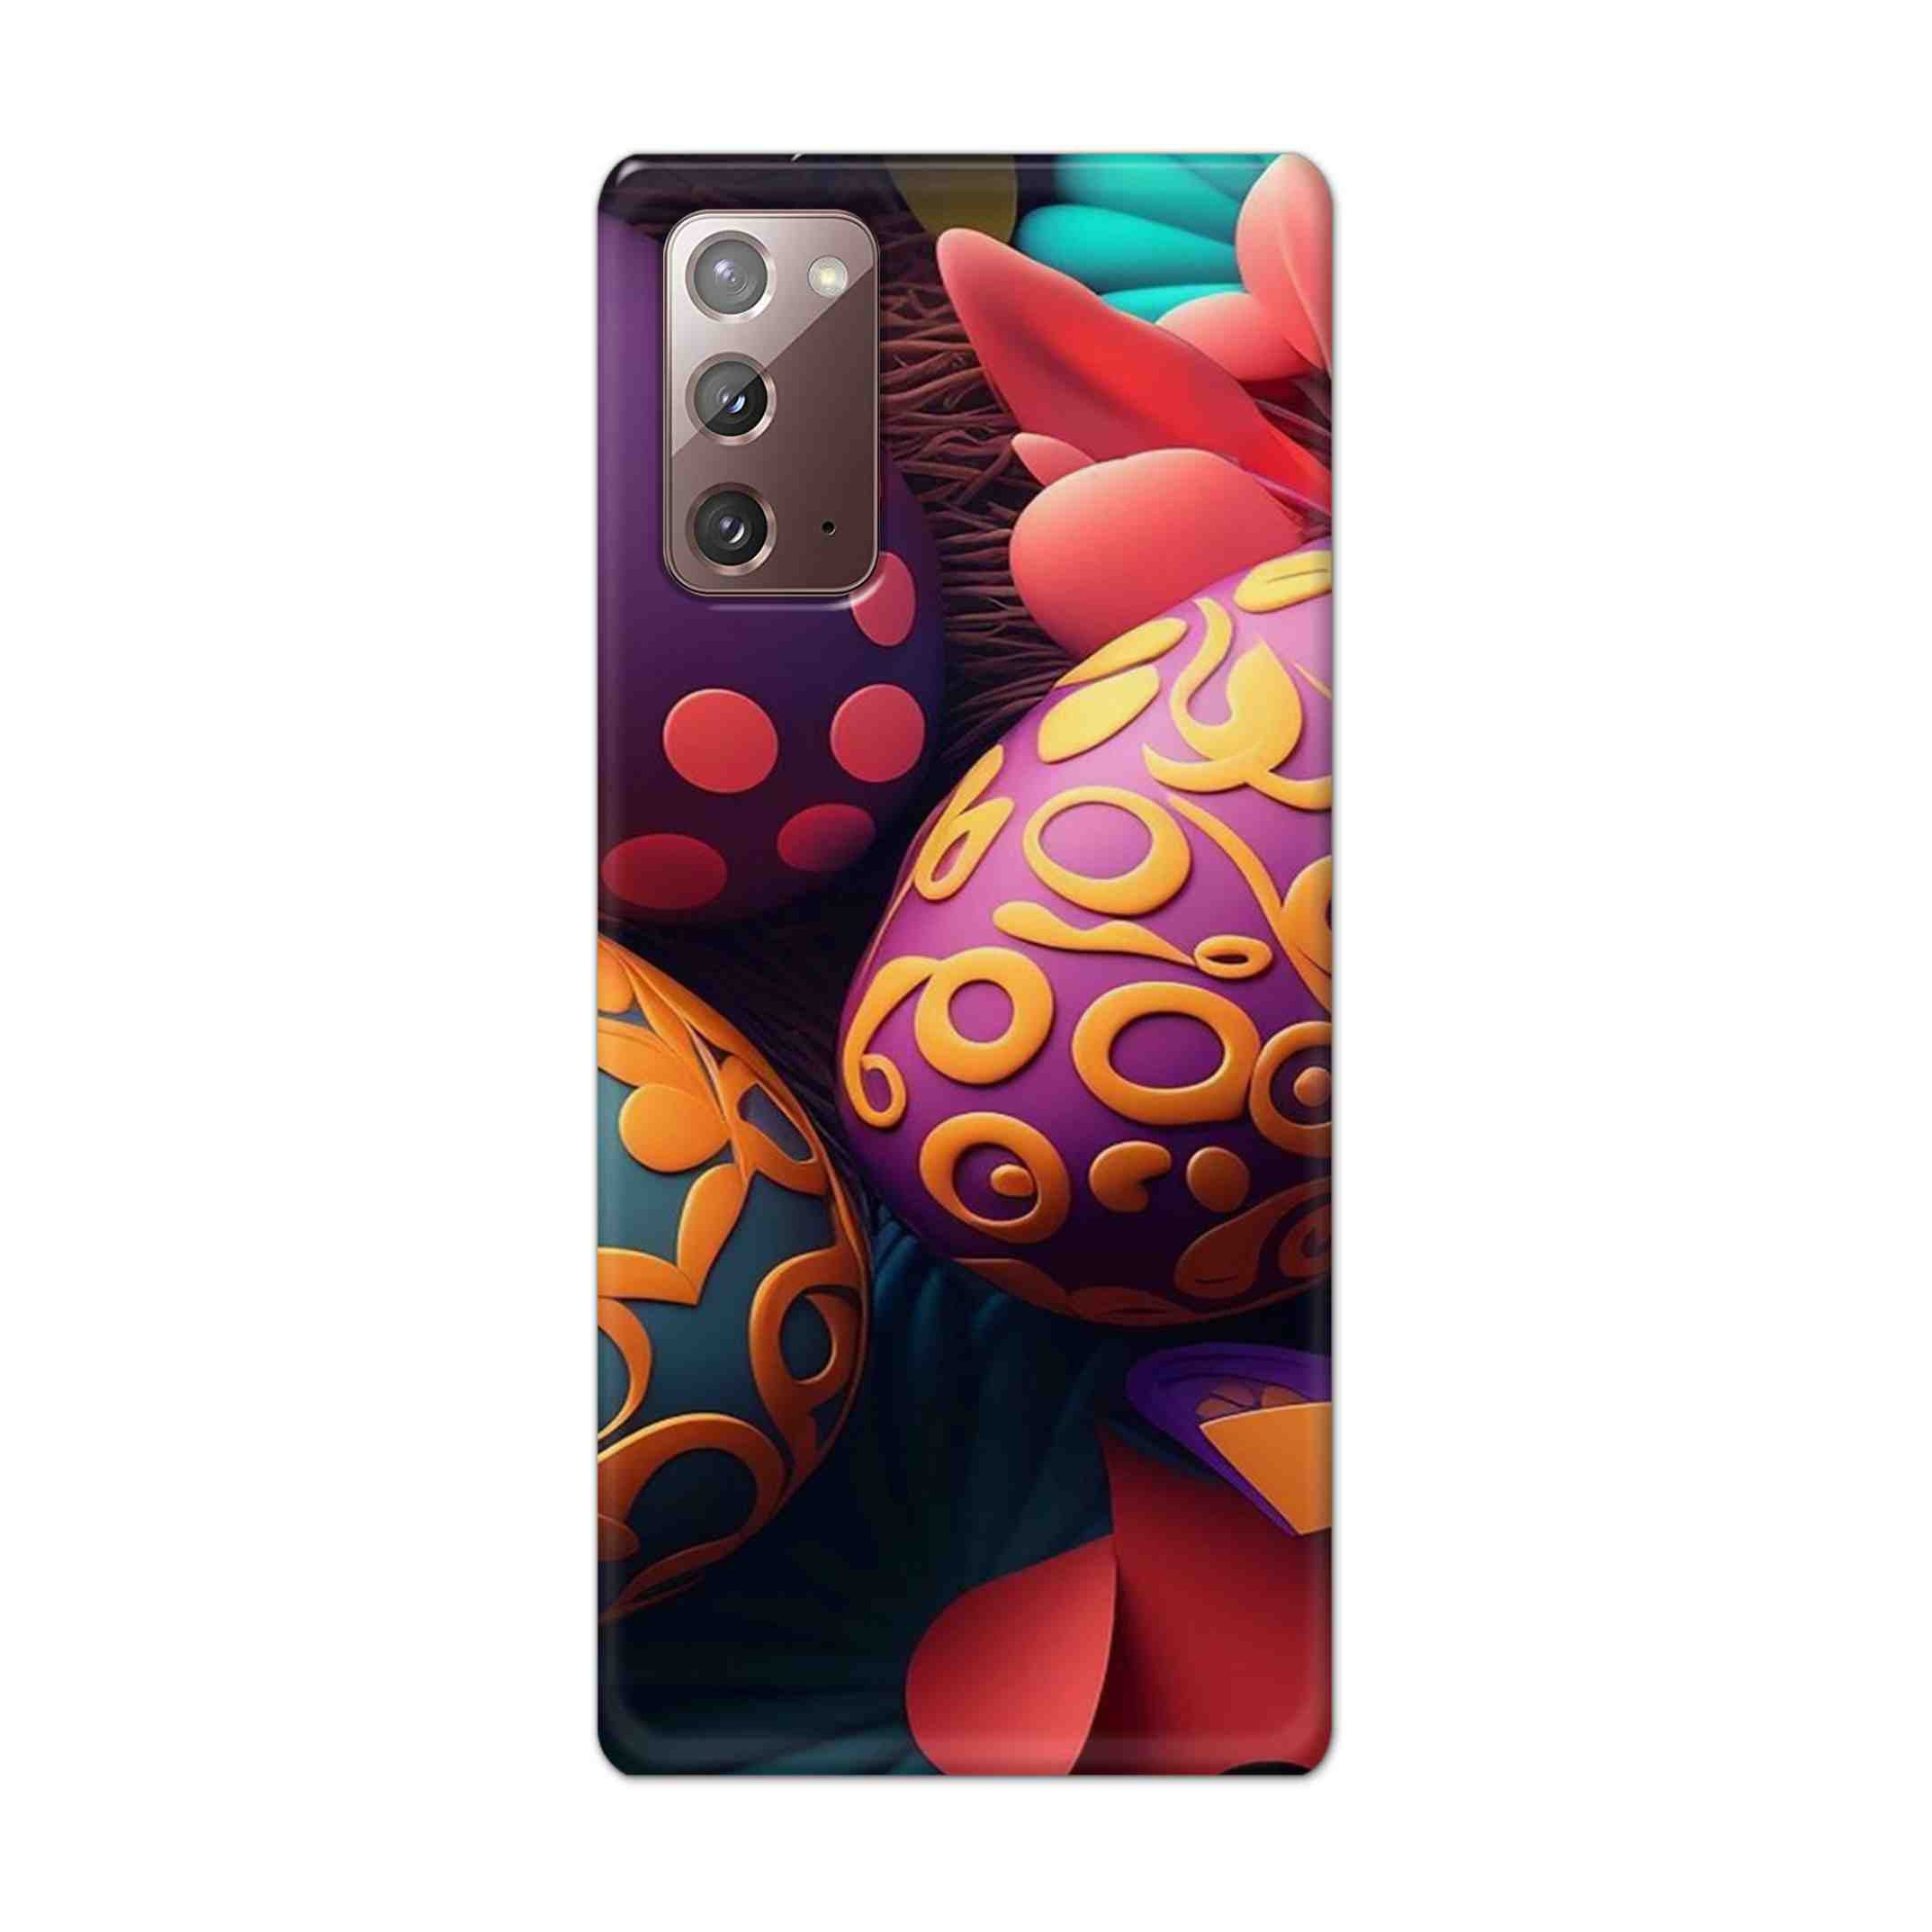 Buy Easter Egg Hard Back Mobile Phone Case Cover For Samsung Galaxy Note 20 Online